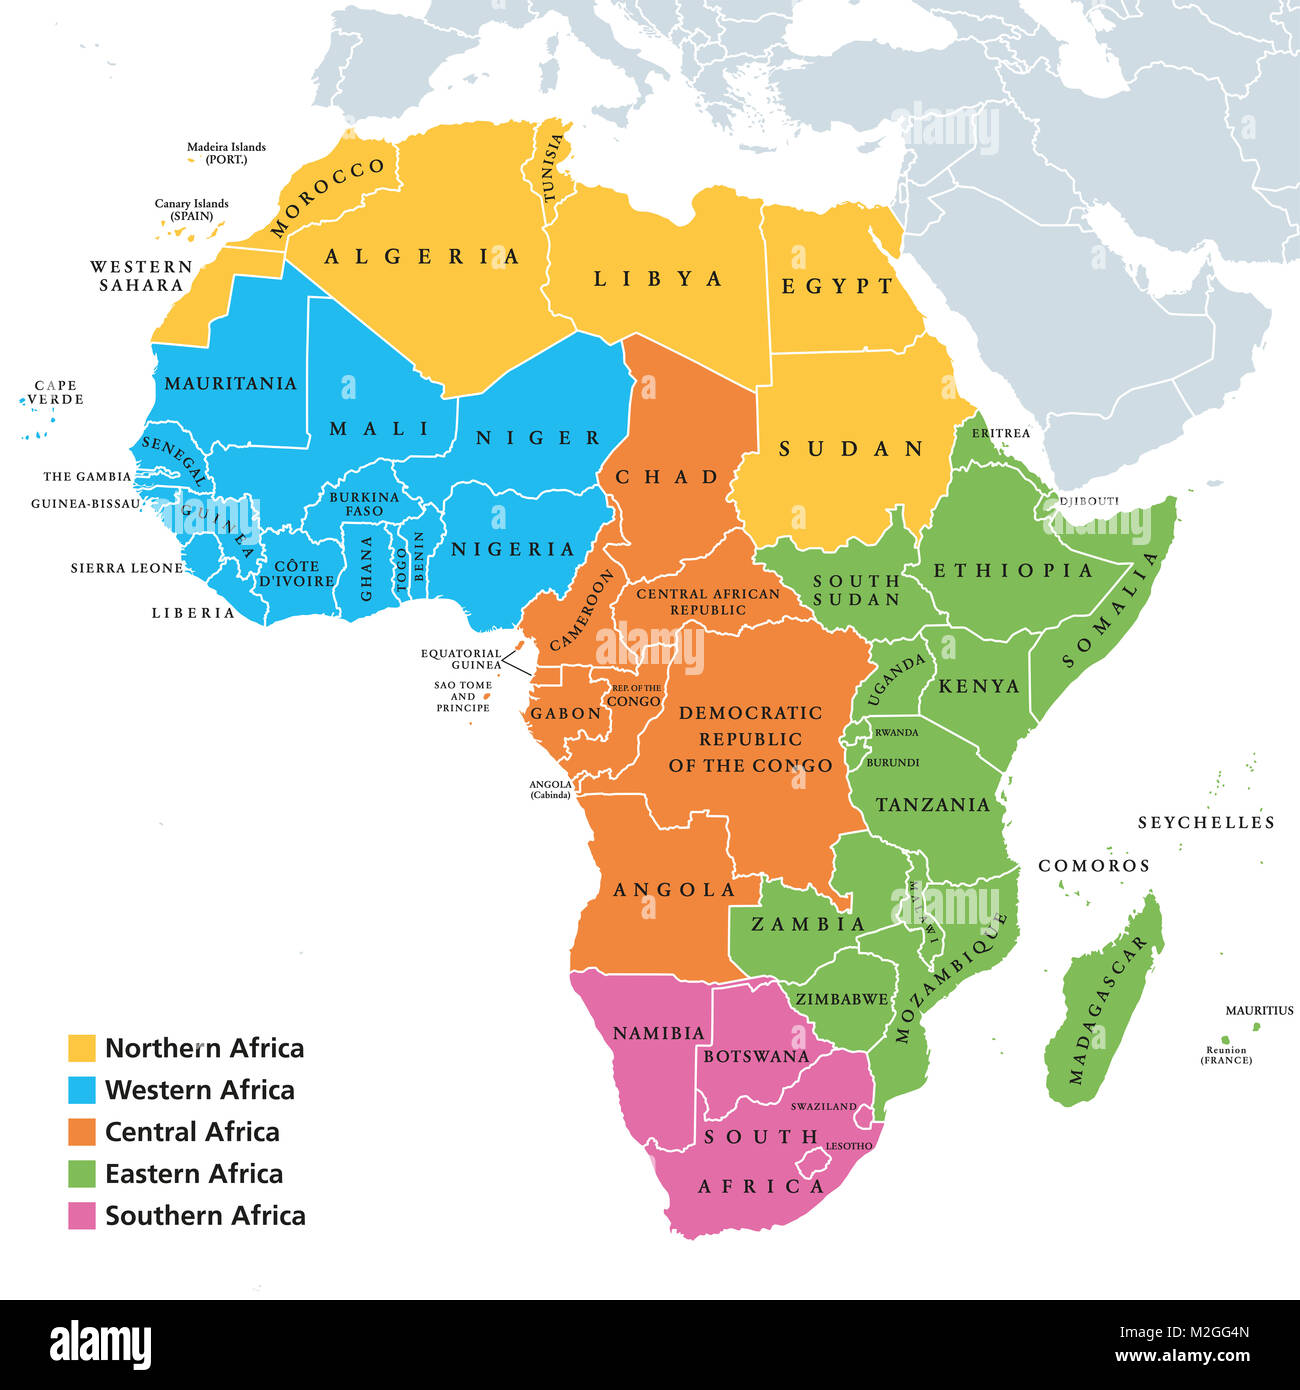 Africa regions political map with single countries. United Nations geoscheme. Northern, Western, Central, Eastern and Southern Africa. Stock Photo